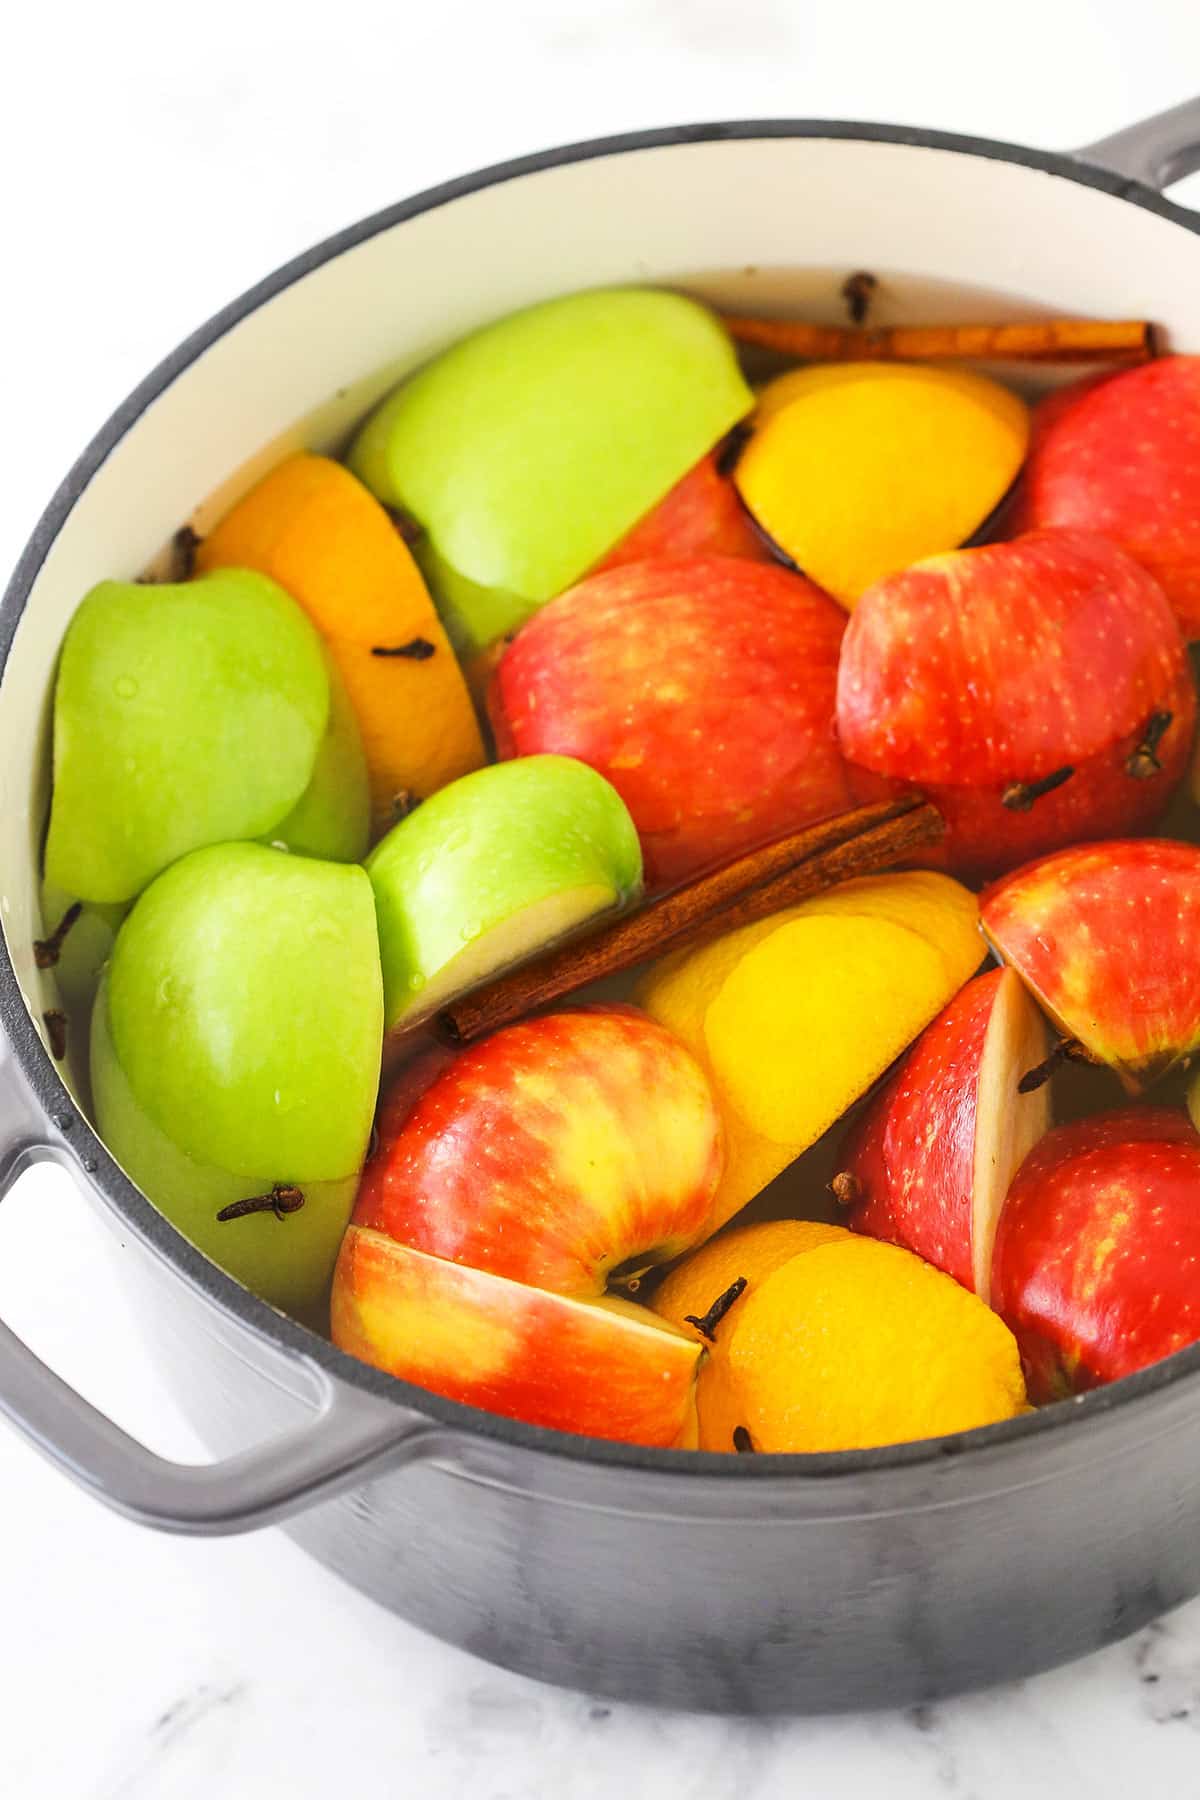 Quartered apples in a stockpot with a quartered orange, cloves and cinnamon sticks